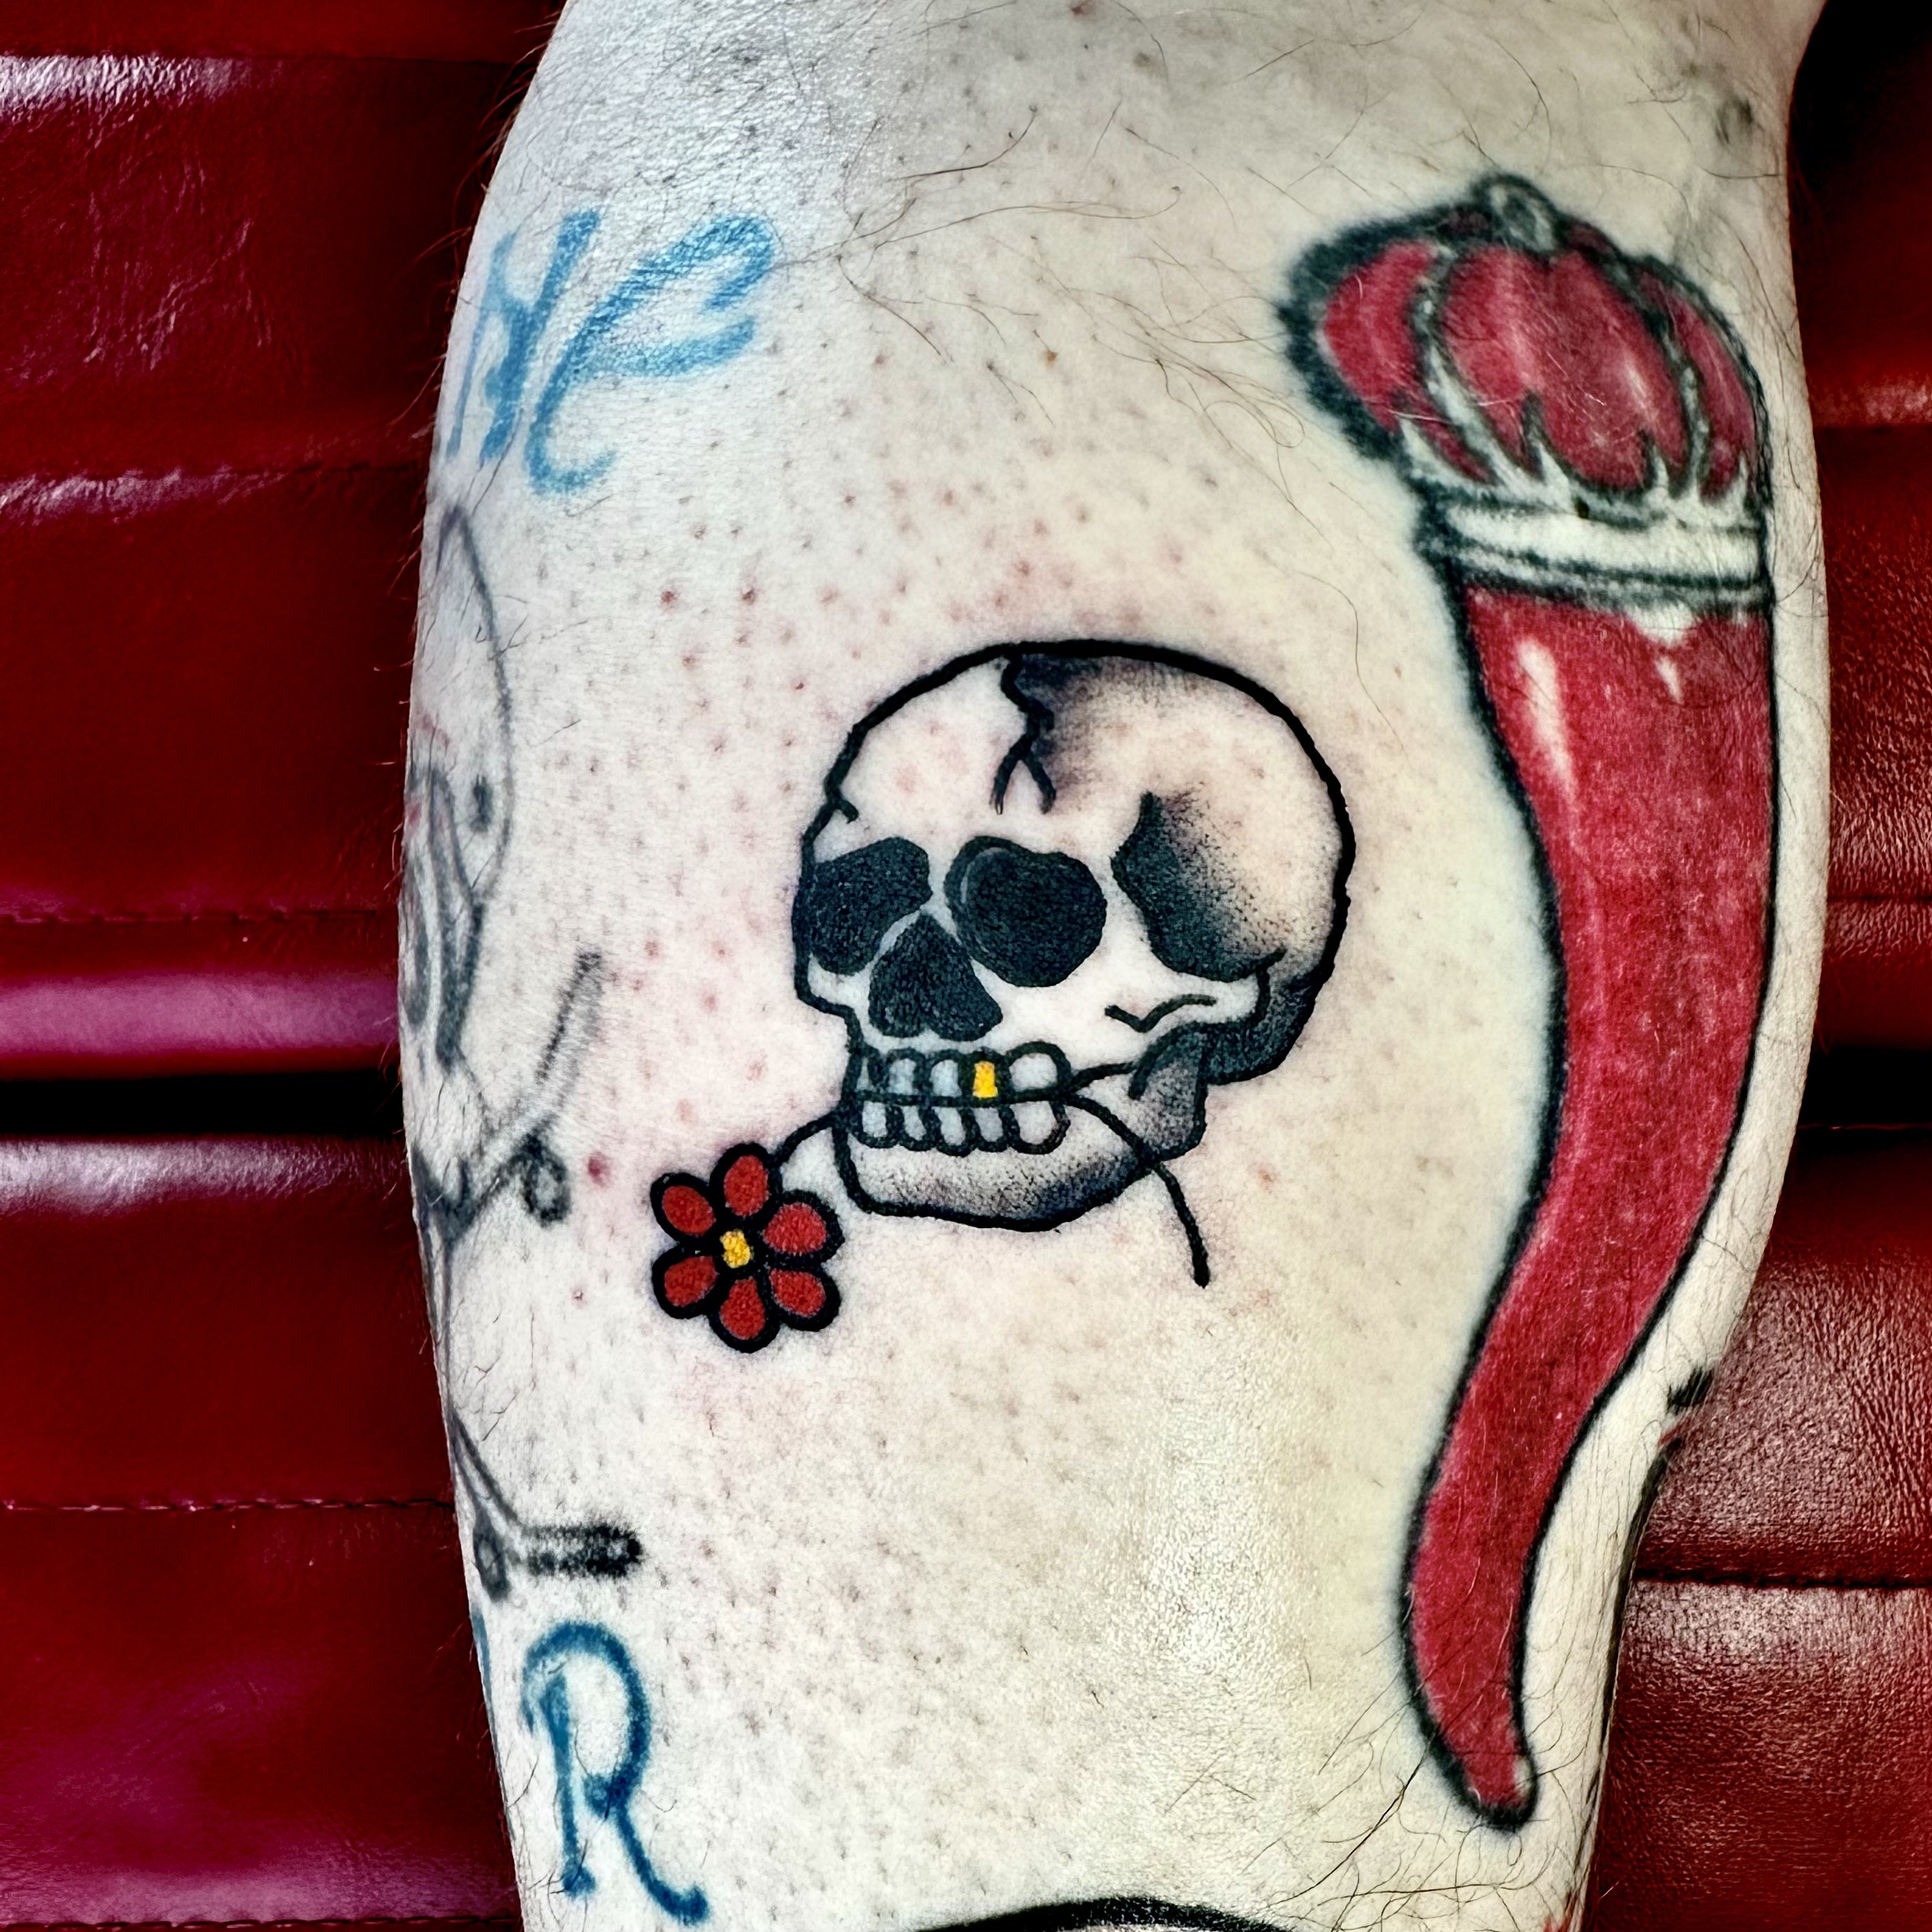 Tattoo of a skull with a red flower and a gold tooth